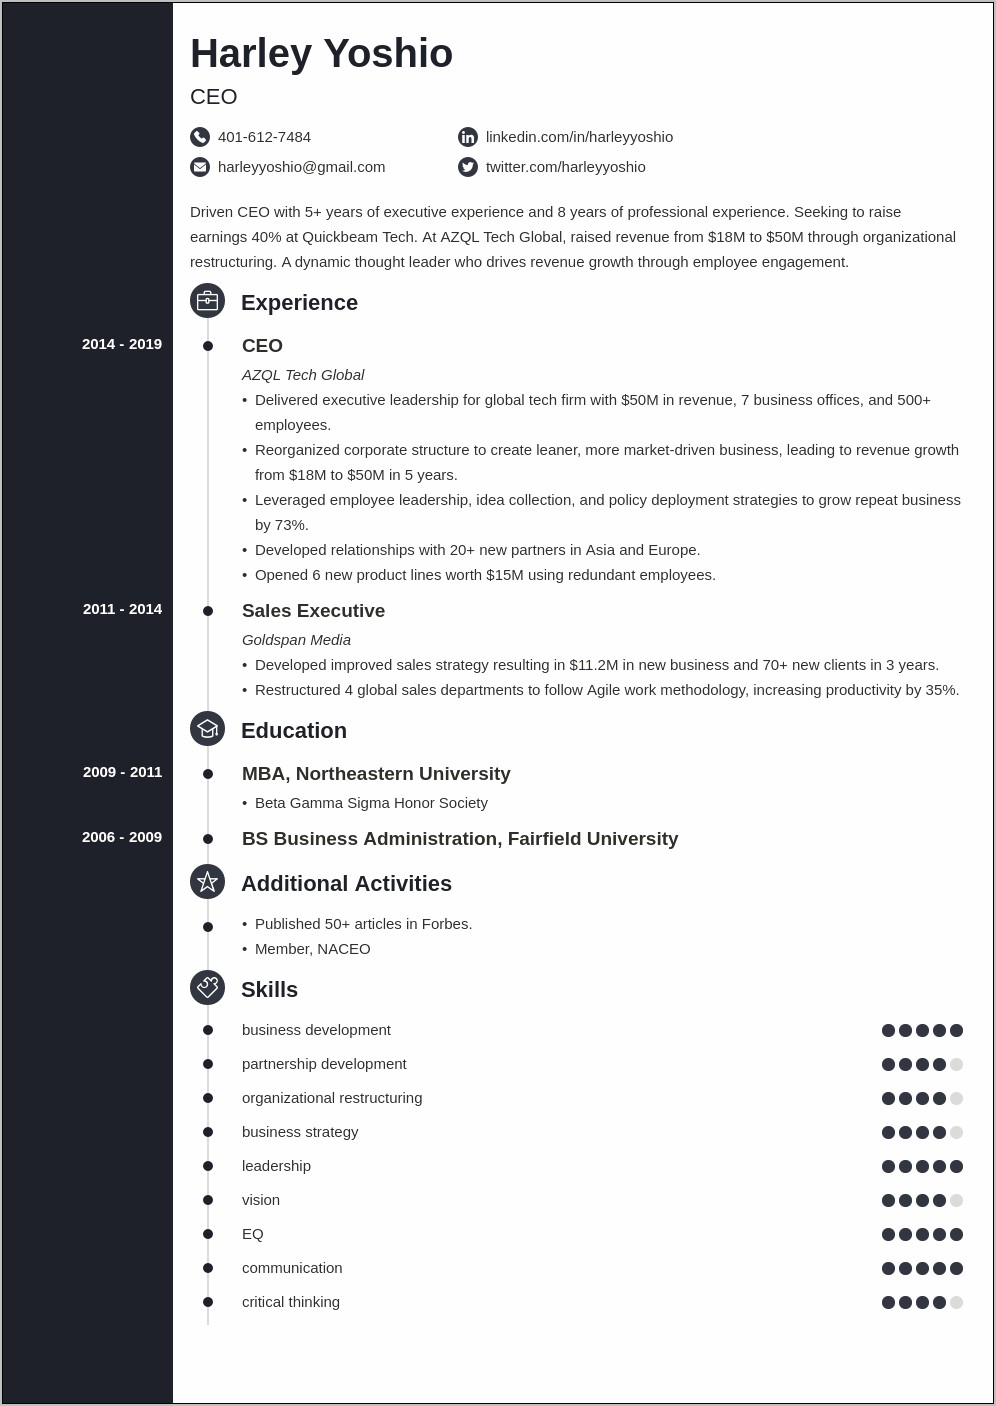 Mulching Business Owner Ceo Resume Description